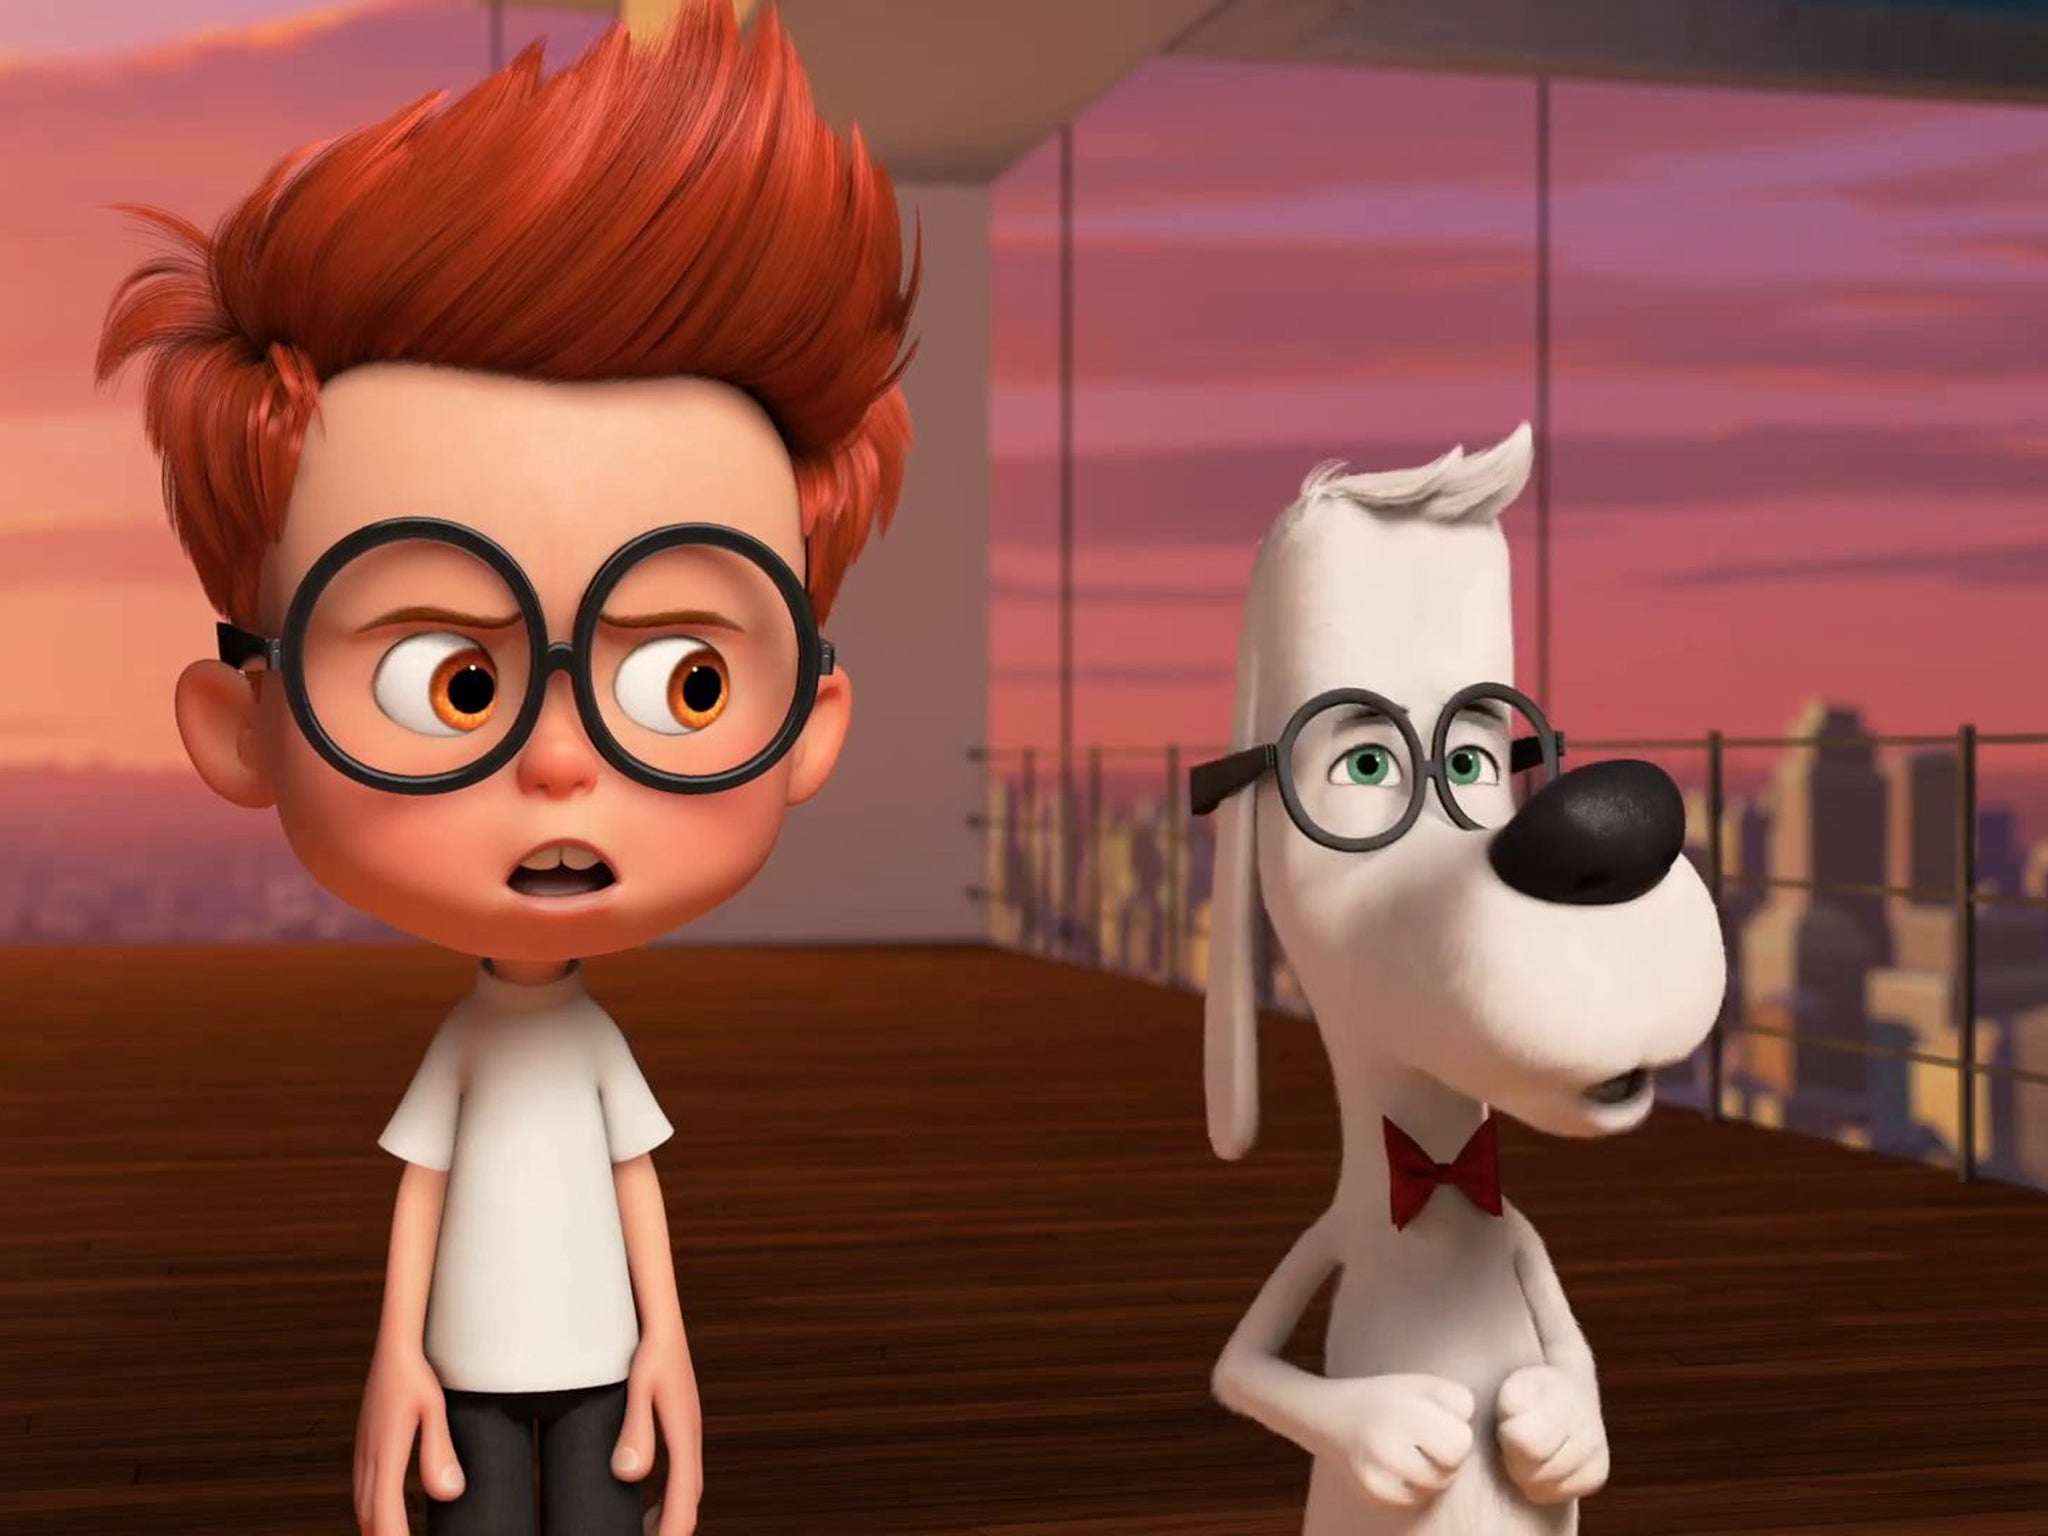 The film-makers convey Mr Peabody's dogged devotion to his adopted son without lapsing too far into sentimentality